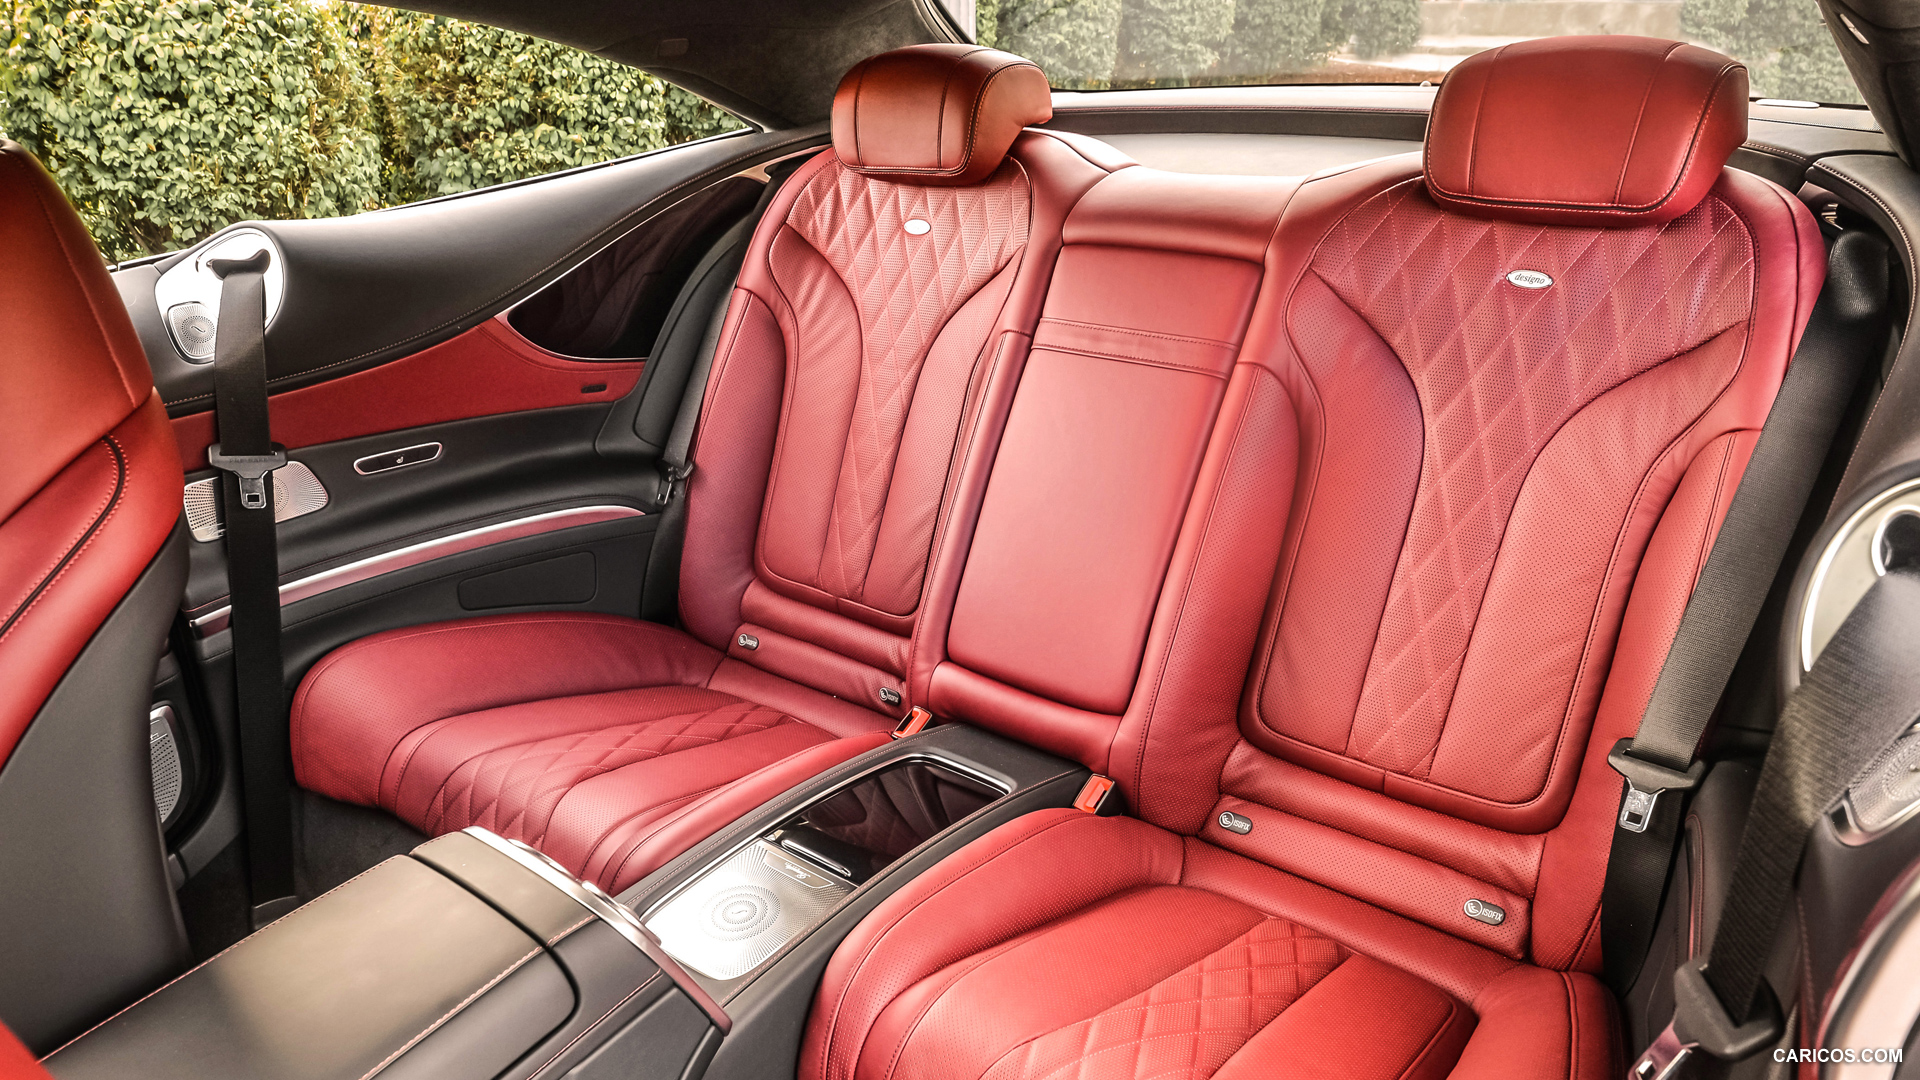 2015 Mercedes-Benz S550 4MATIC Coupe  - Interior Rear Seats, #46 of 60